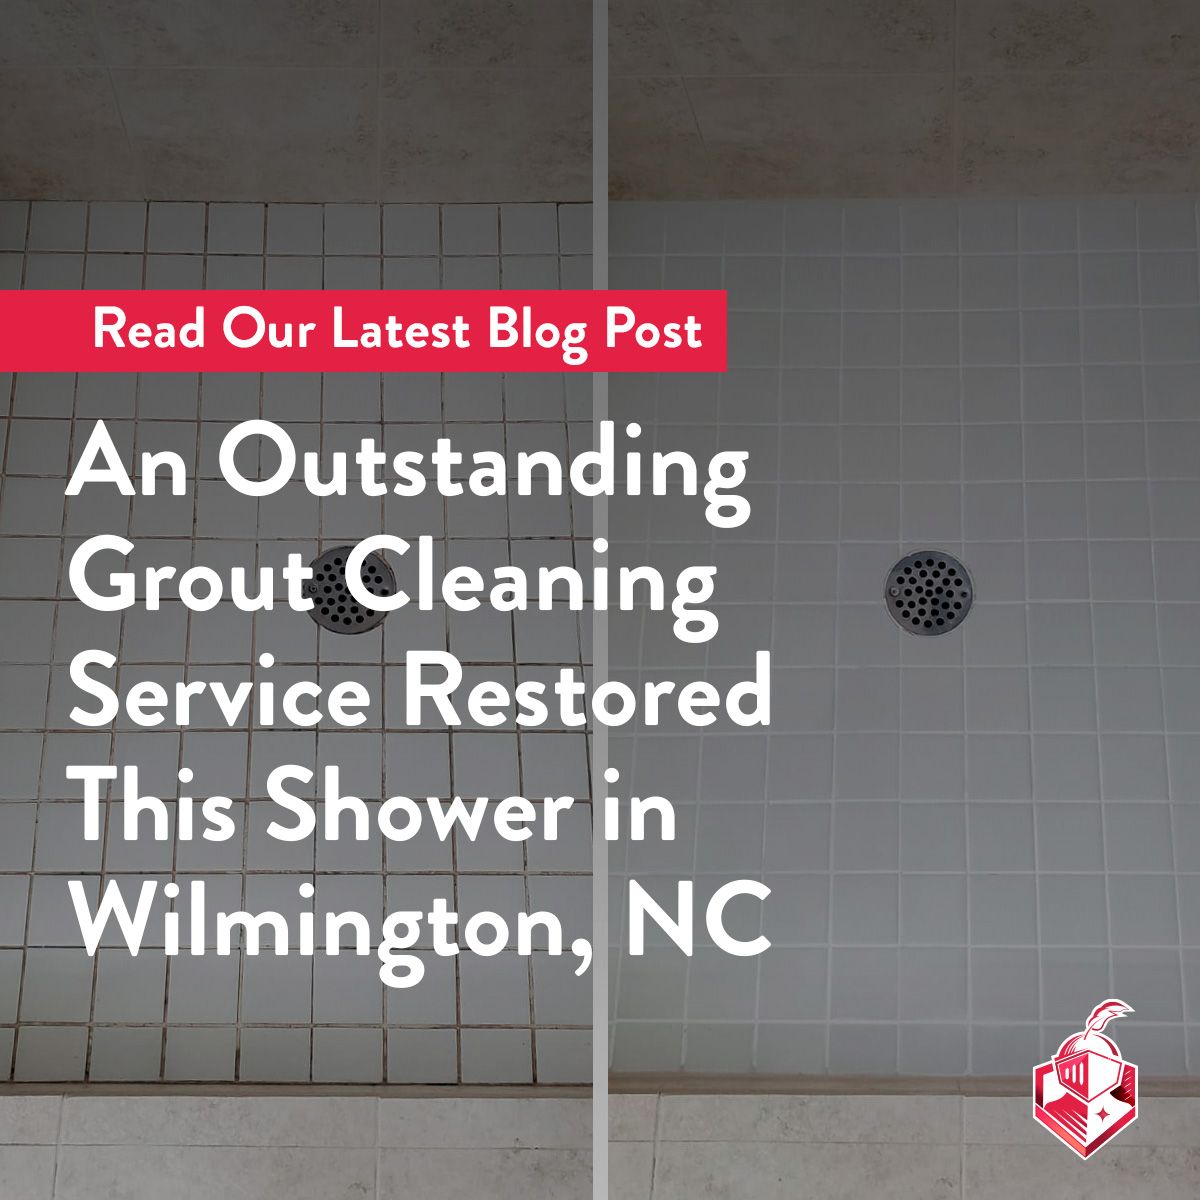 An Outstanding Grout Cleaning Service Restored This Shower in Wilmington, NC